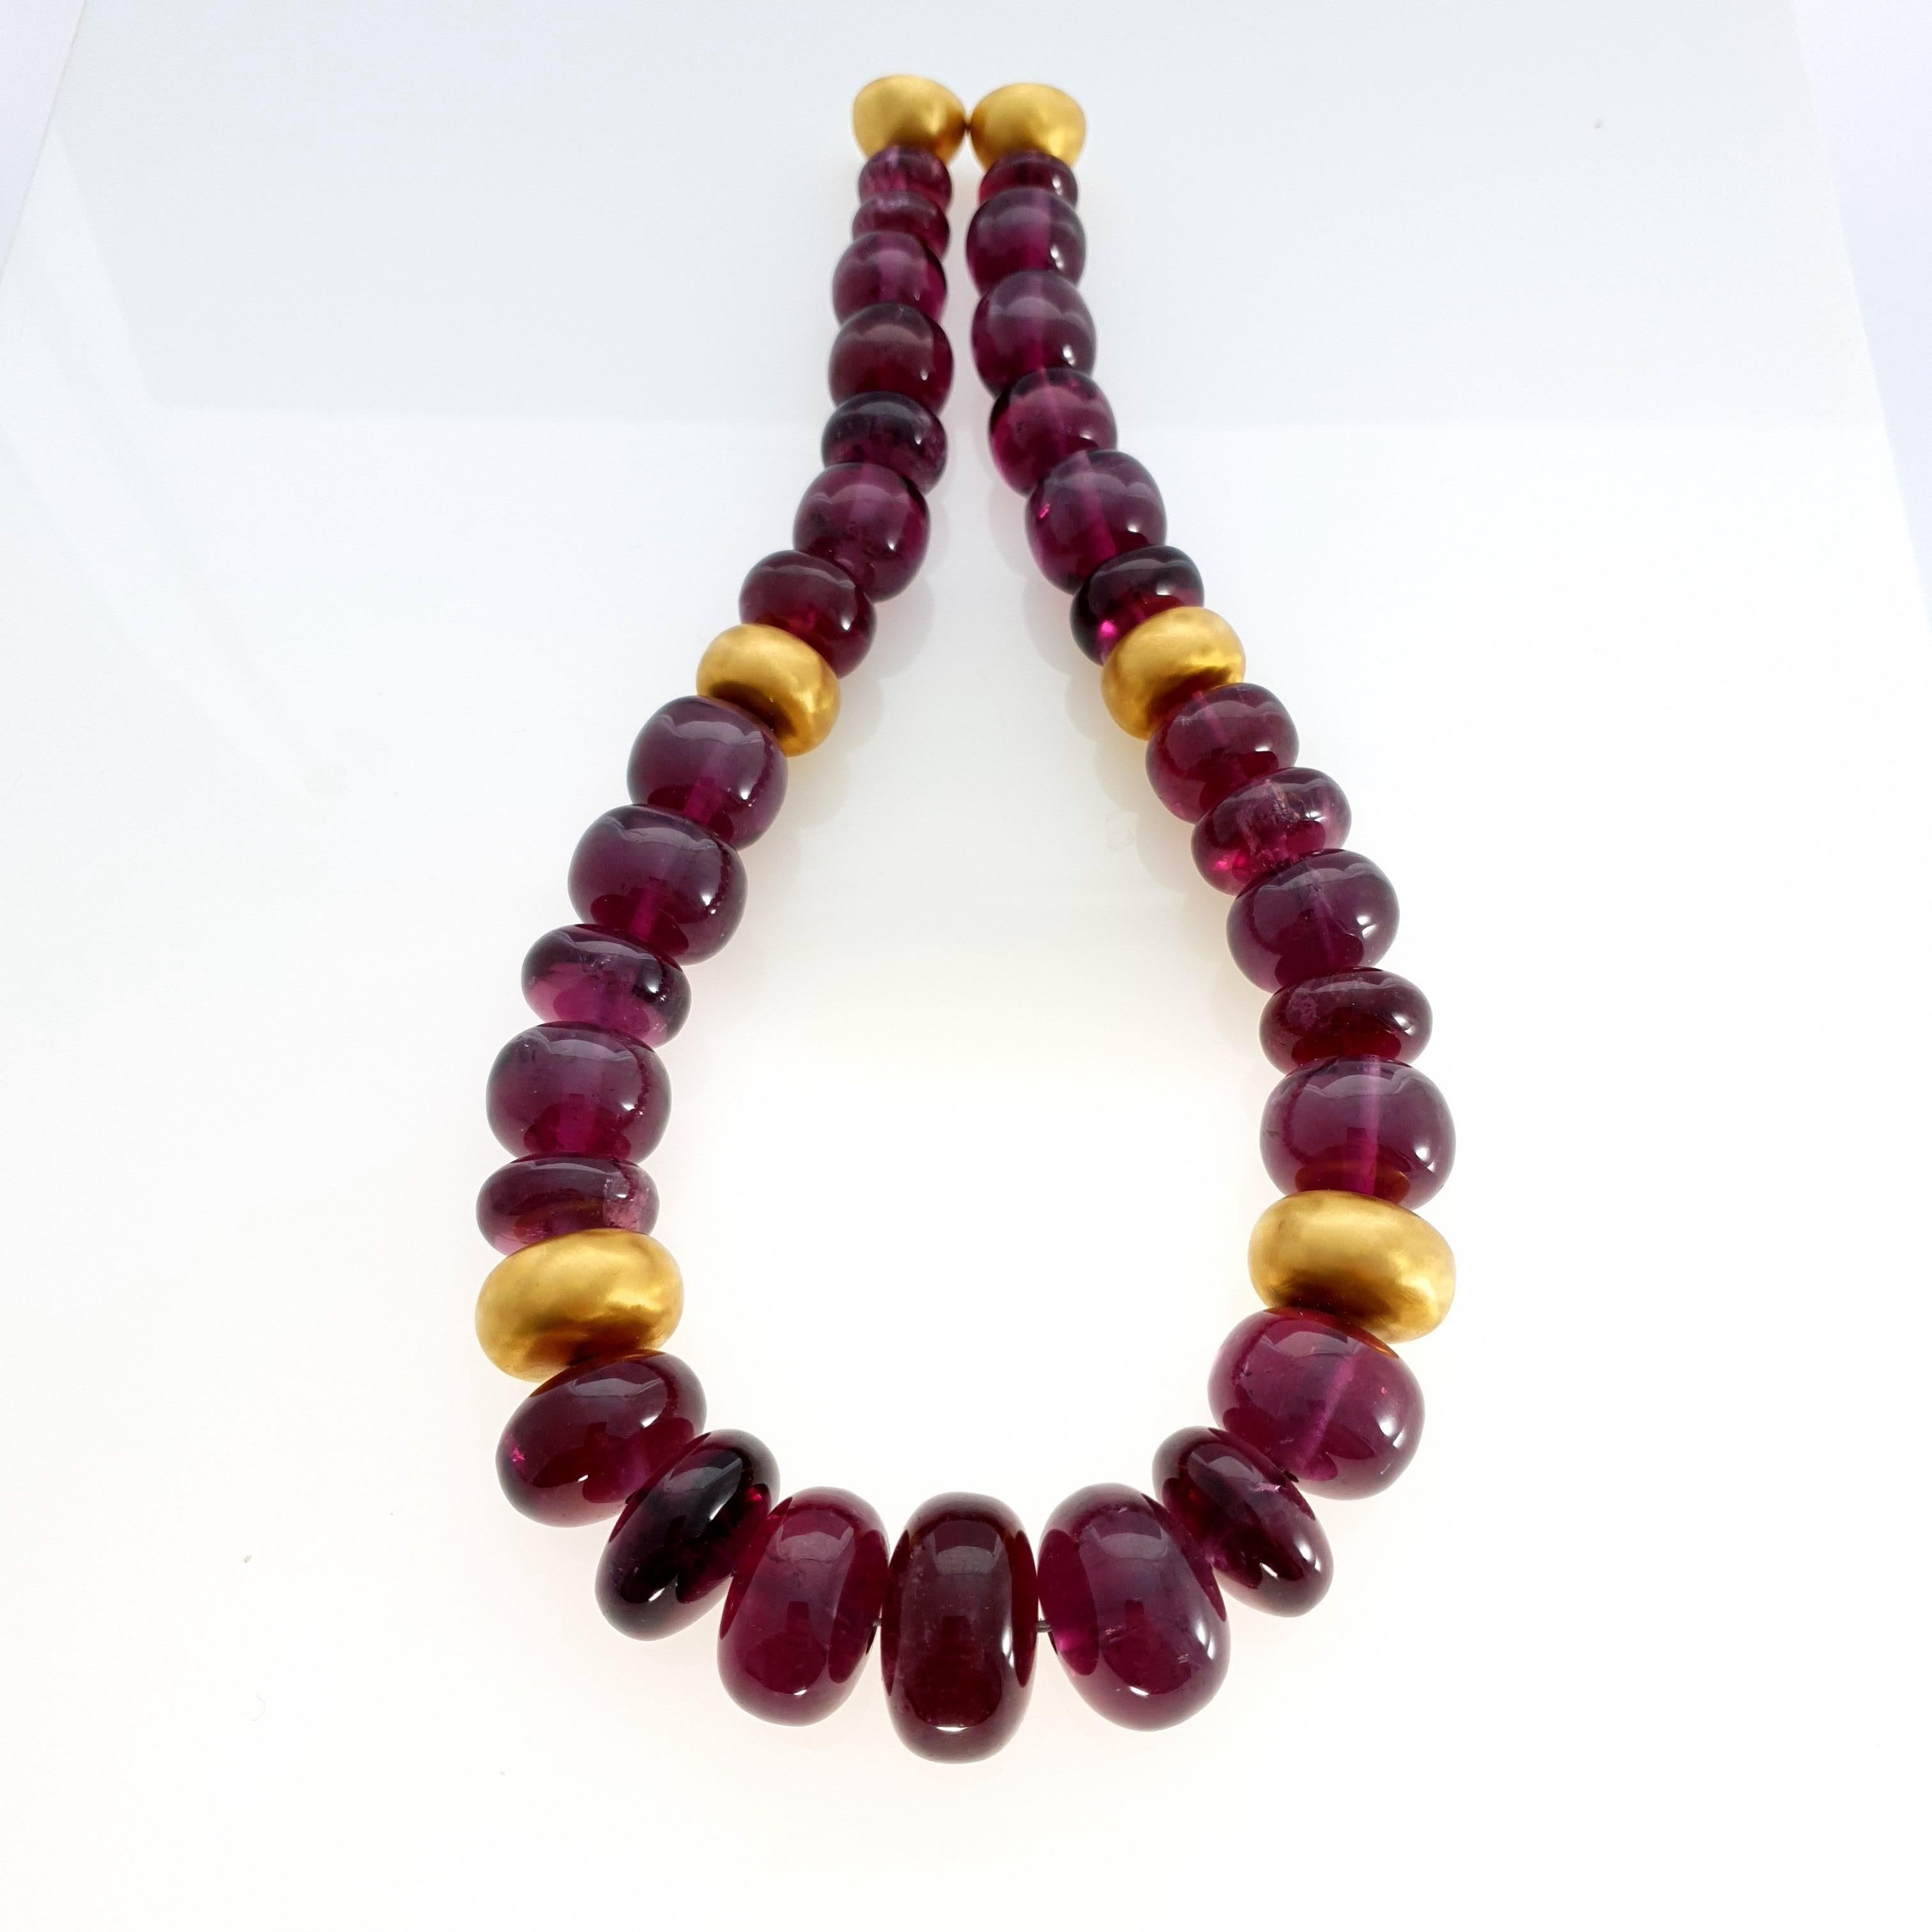 Women's Big Purple Rubelite Tourmaline Rondel Beaded Necklace with 18 Carat Yellow Gold For Sale